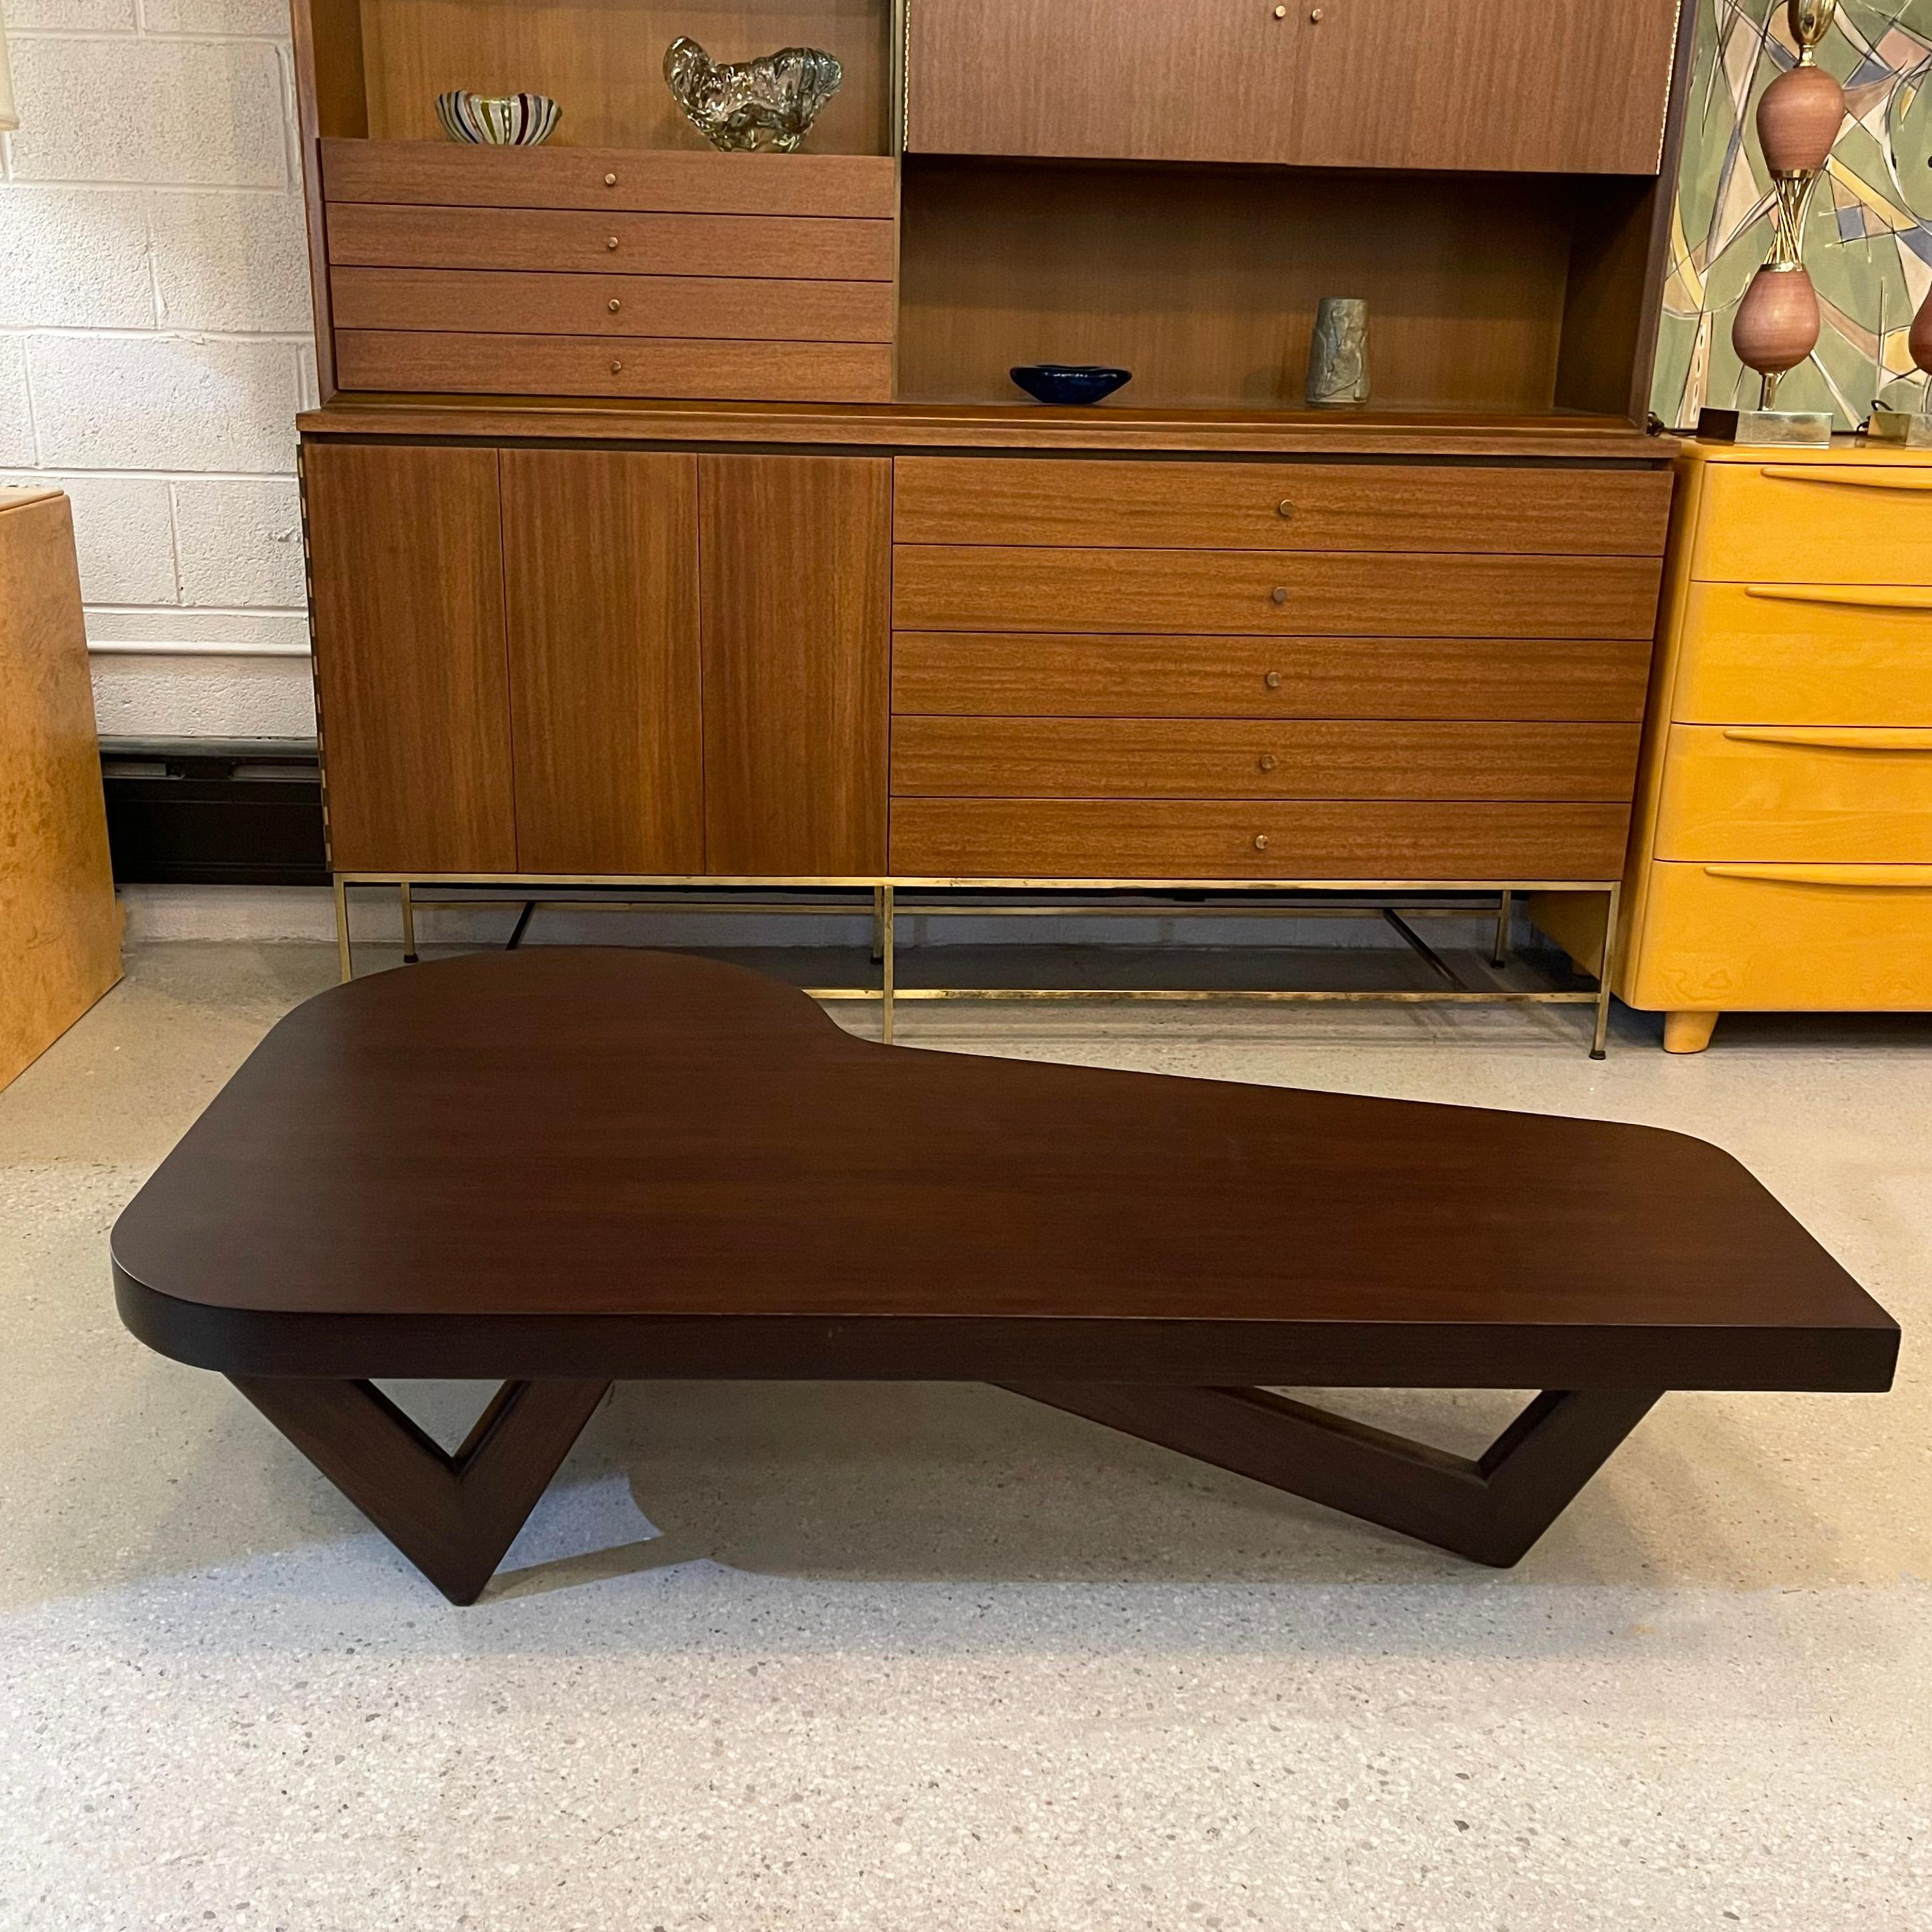 Outstanding, midcentury modern, low, mahogany coffee table fearures a thick biomorphic, piano-shaped top with sculptural, v-shaped legs in the style of Paul Laszlo. The table tapers from the center at 23.5 inches deep to 16 inches deep at it's most